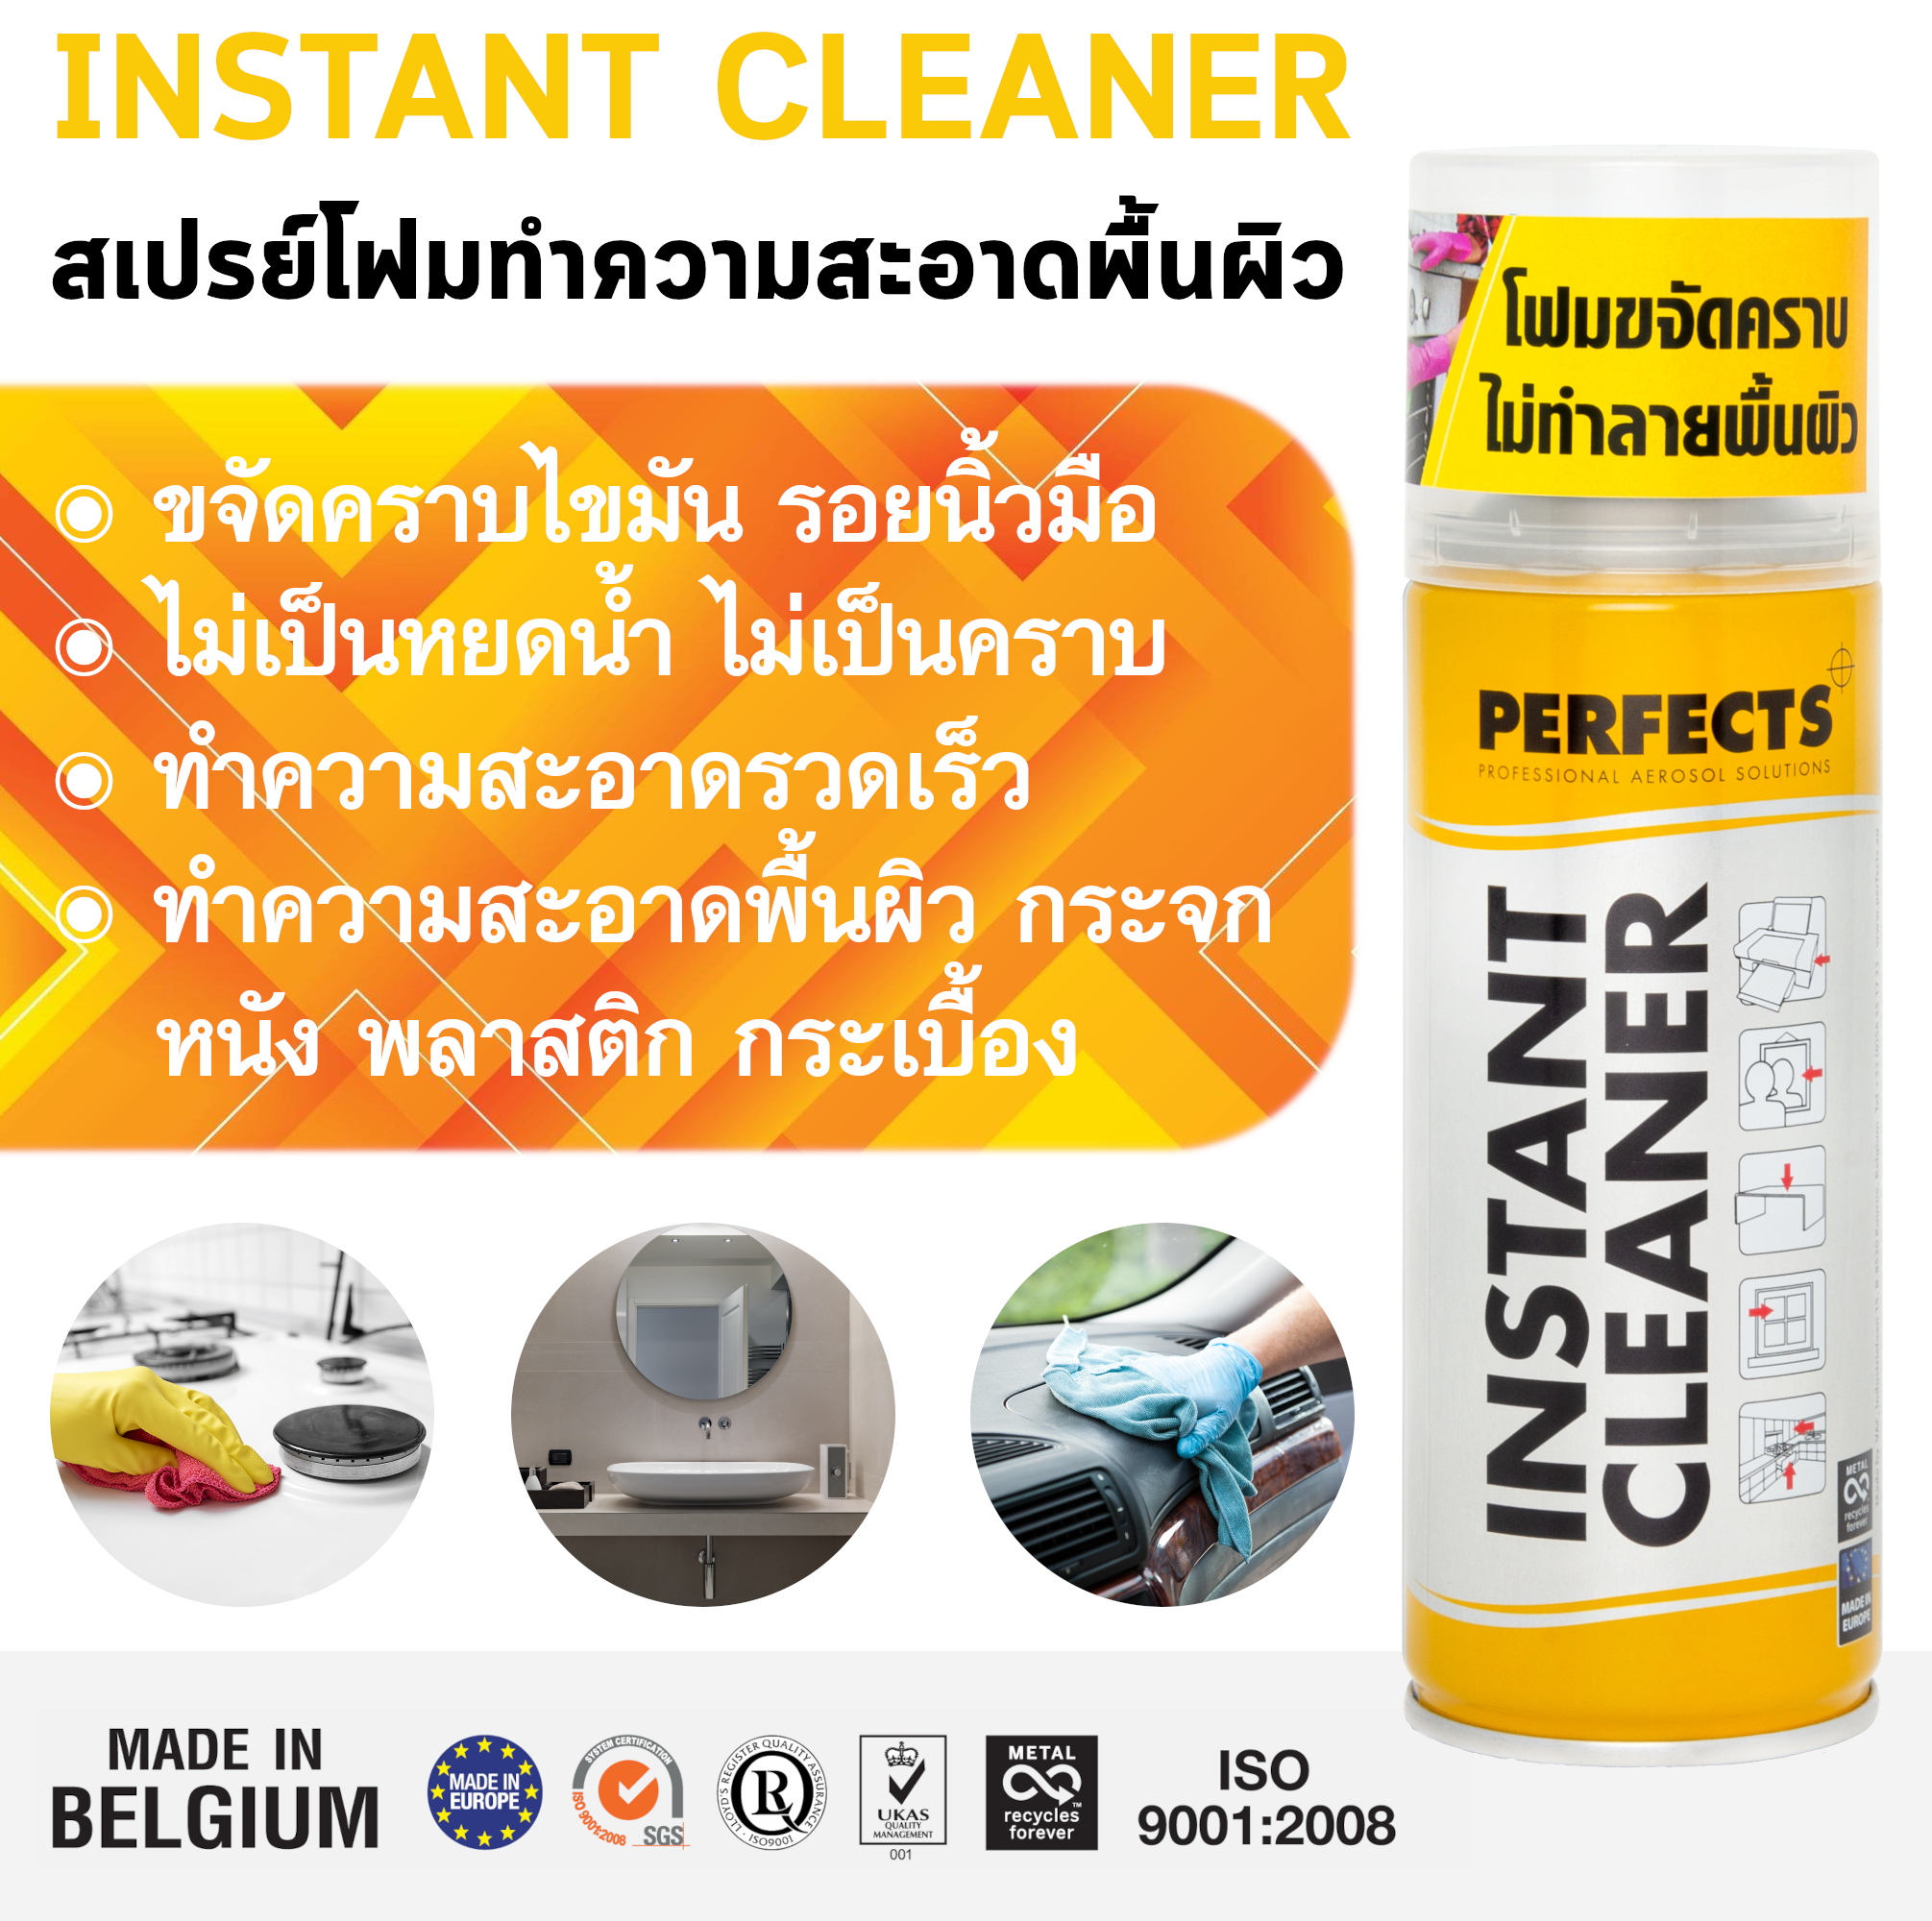 INSTANT CLEANER